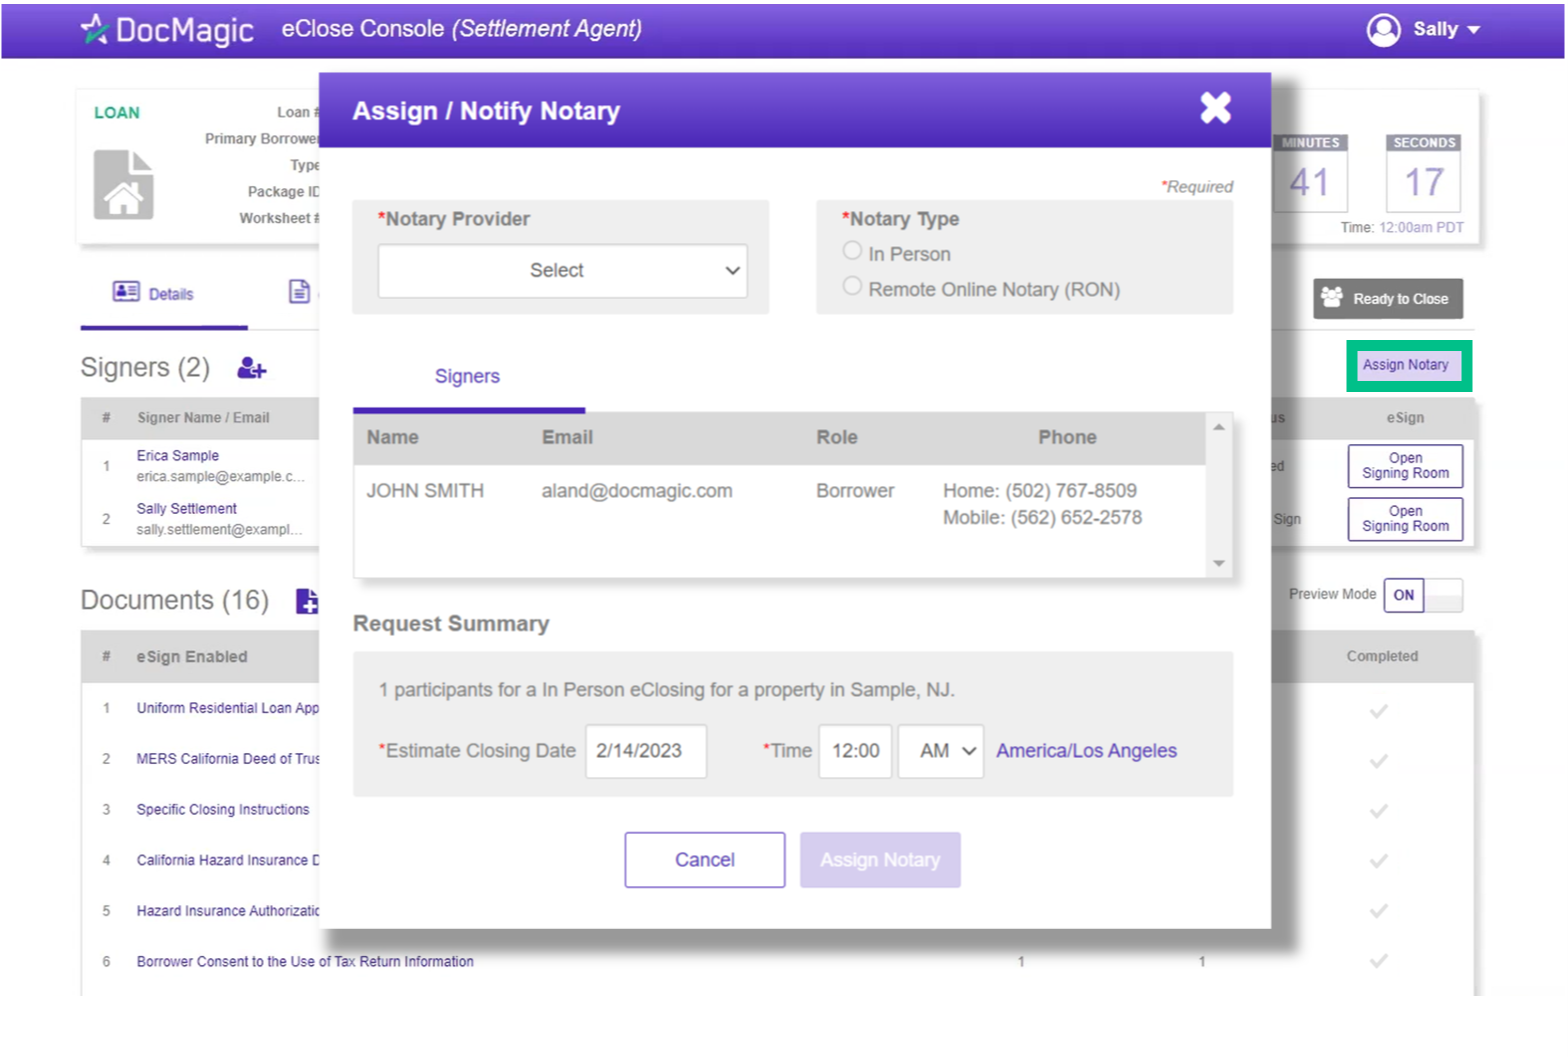 Screenshot of the eClose Console - Assign Notary